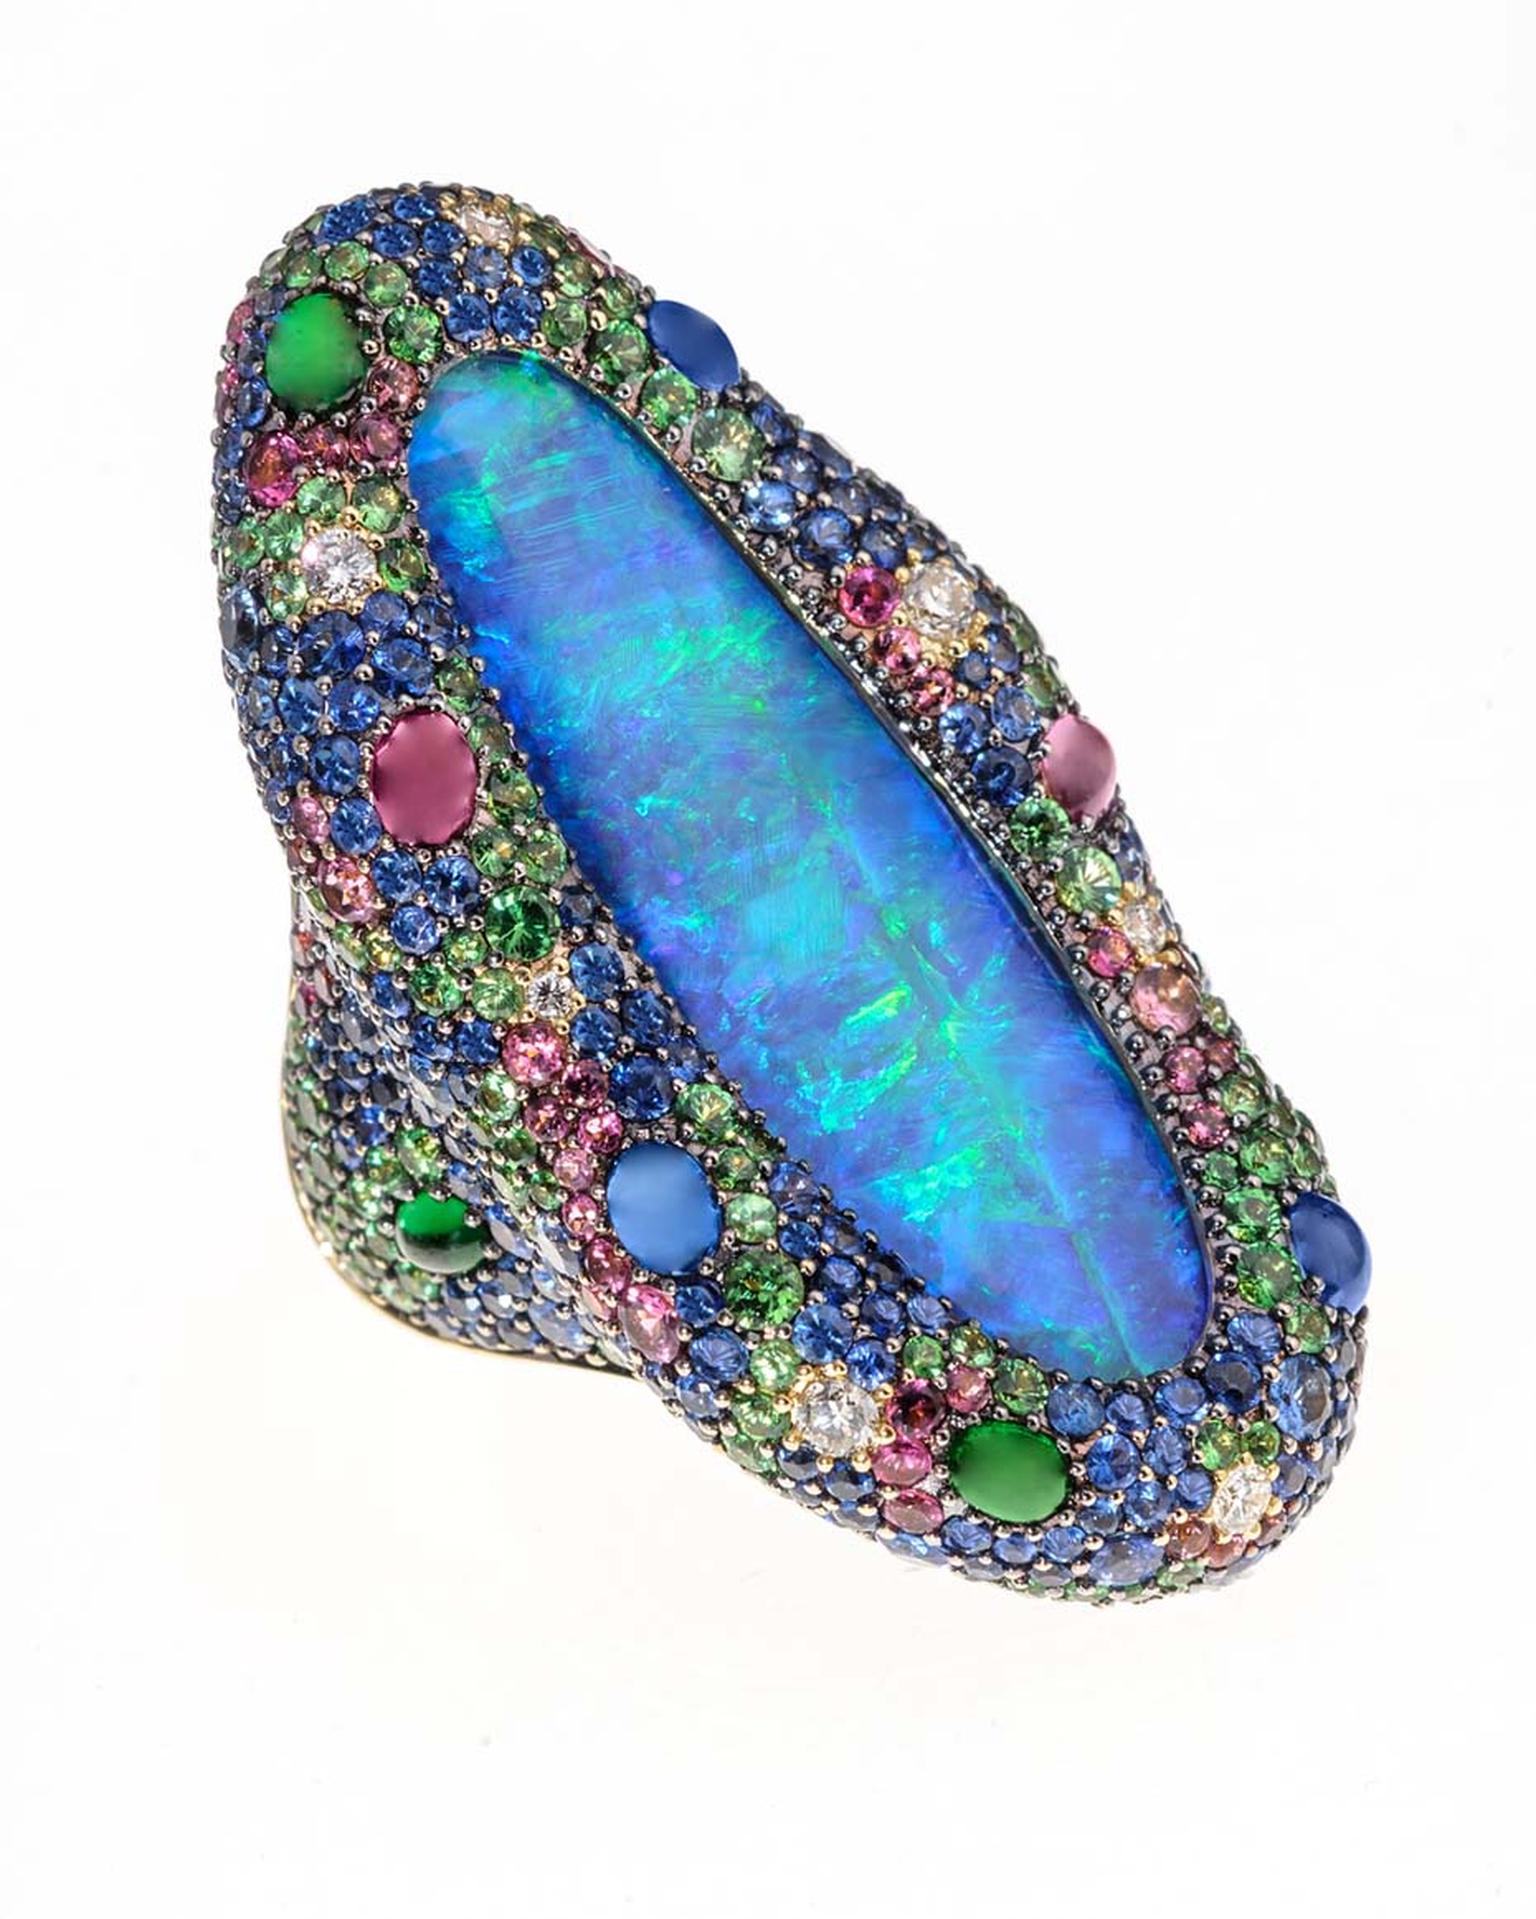 Margot McKinney Solid Natural Boulder opal ring with a central 24.05ct opal from the Lightning Ridge mine in McKinney’s native Australia, which is renowned for its opals.